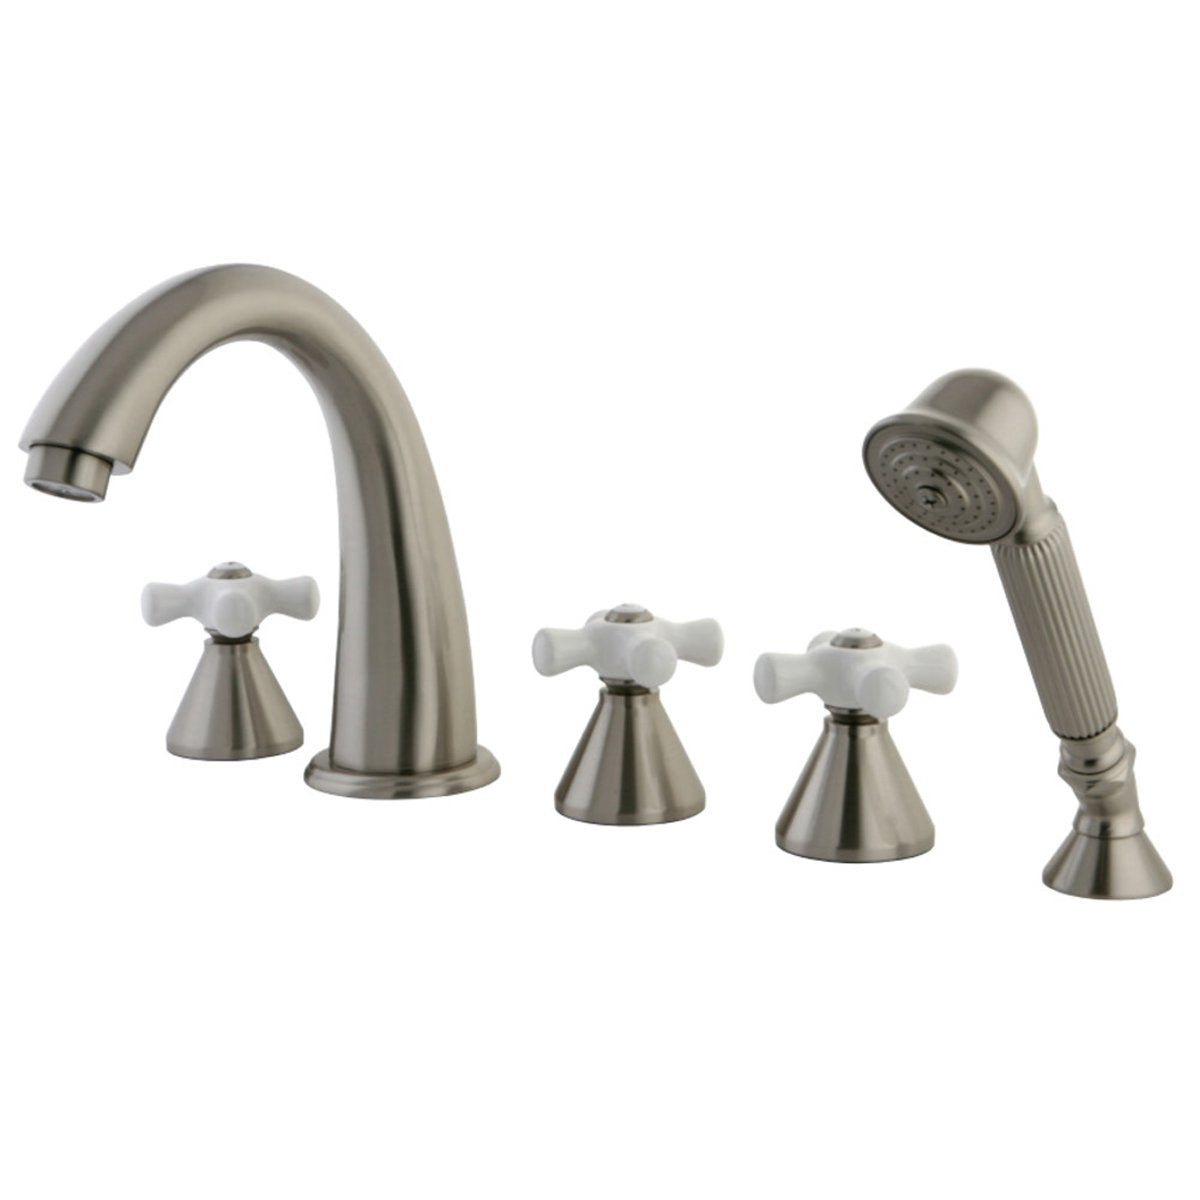 Kingston Brass Deck Mount Roman Tub Filler 5 Pieces with Hand Shower